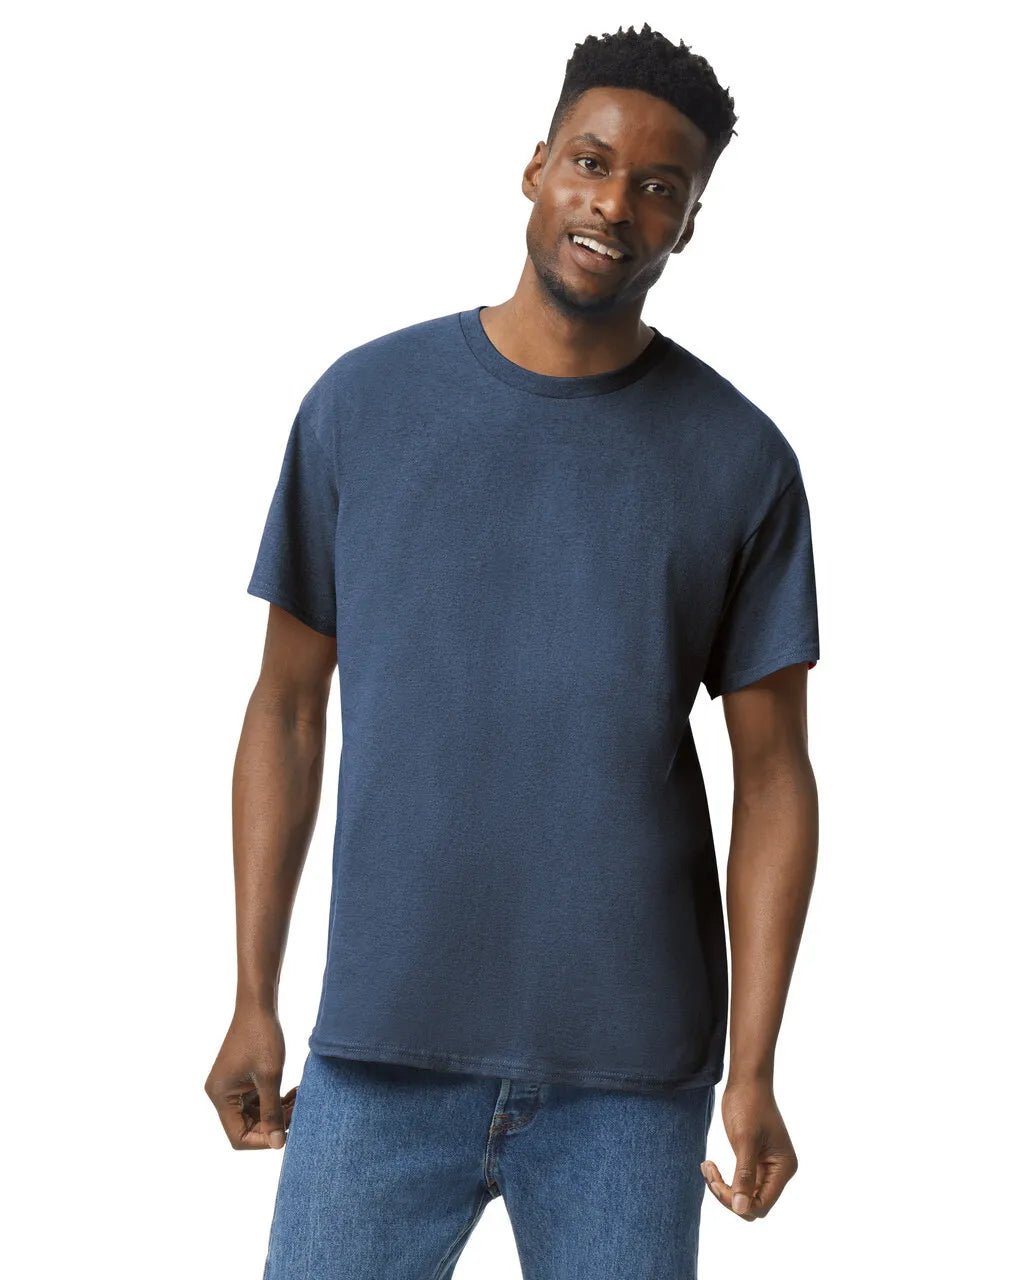 Avia 100% Recycled Polyester Blue Active T-Shirt Size L - 31% off